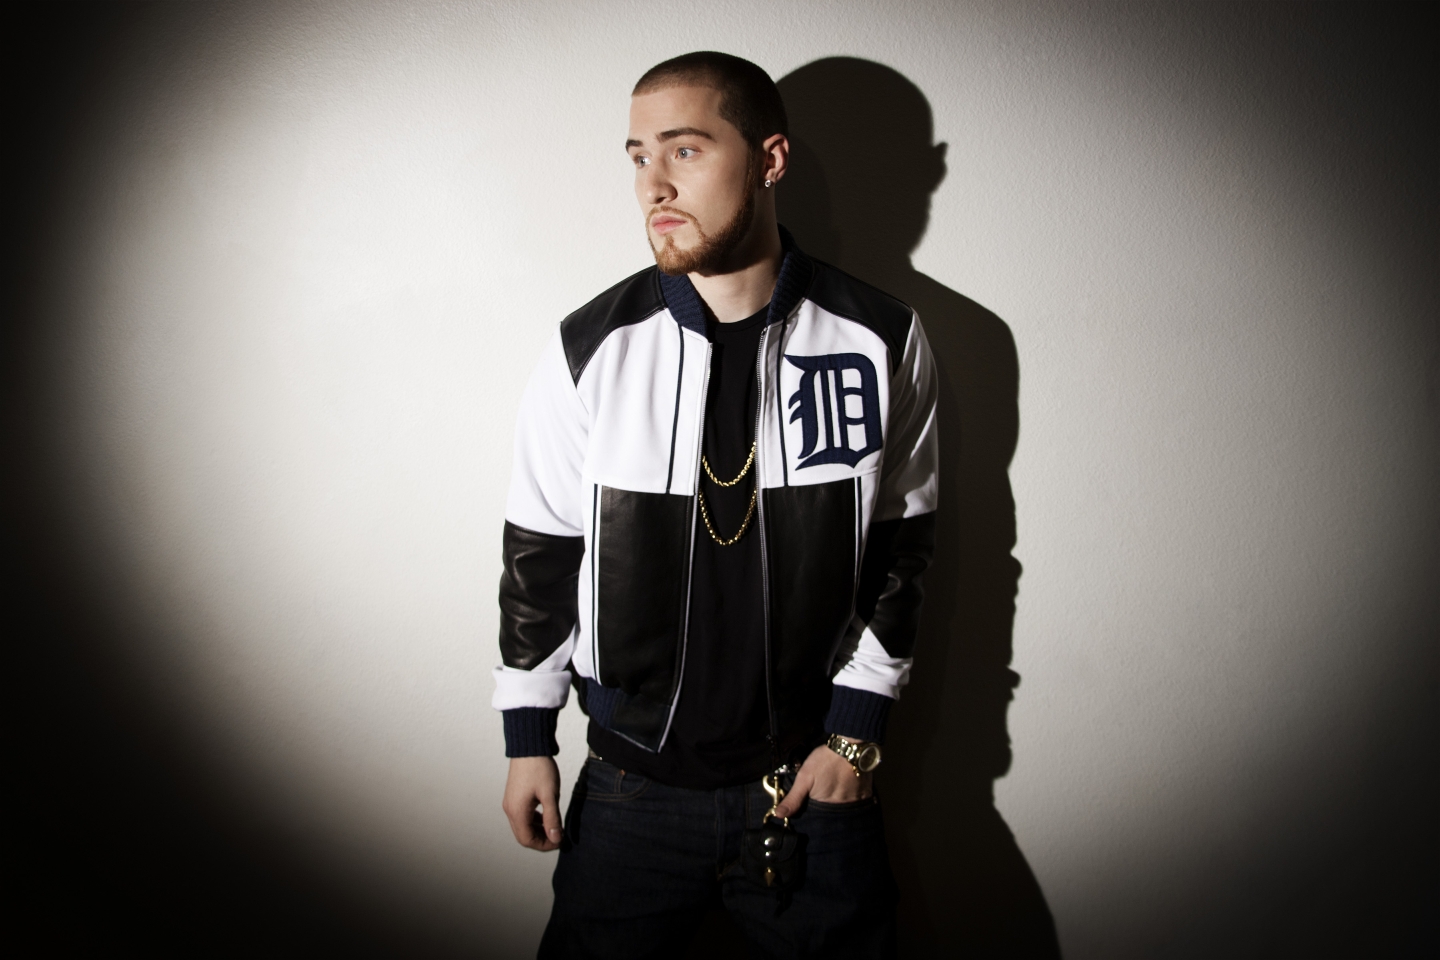 Mike Posner for RCA Records - November 2011
Photo credit: Tyler Shields
